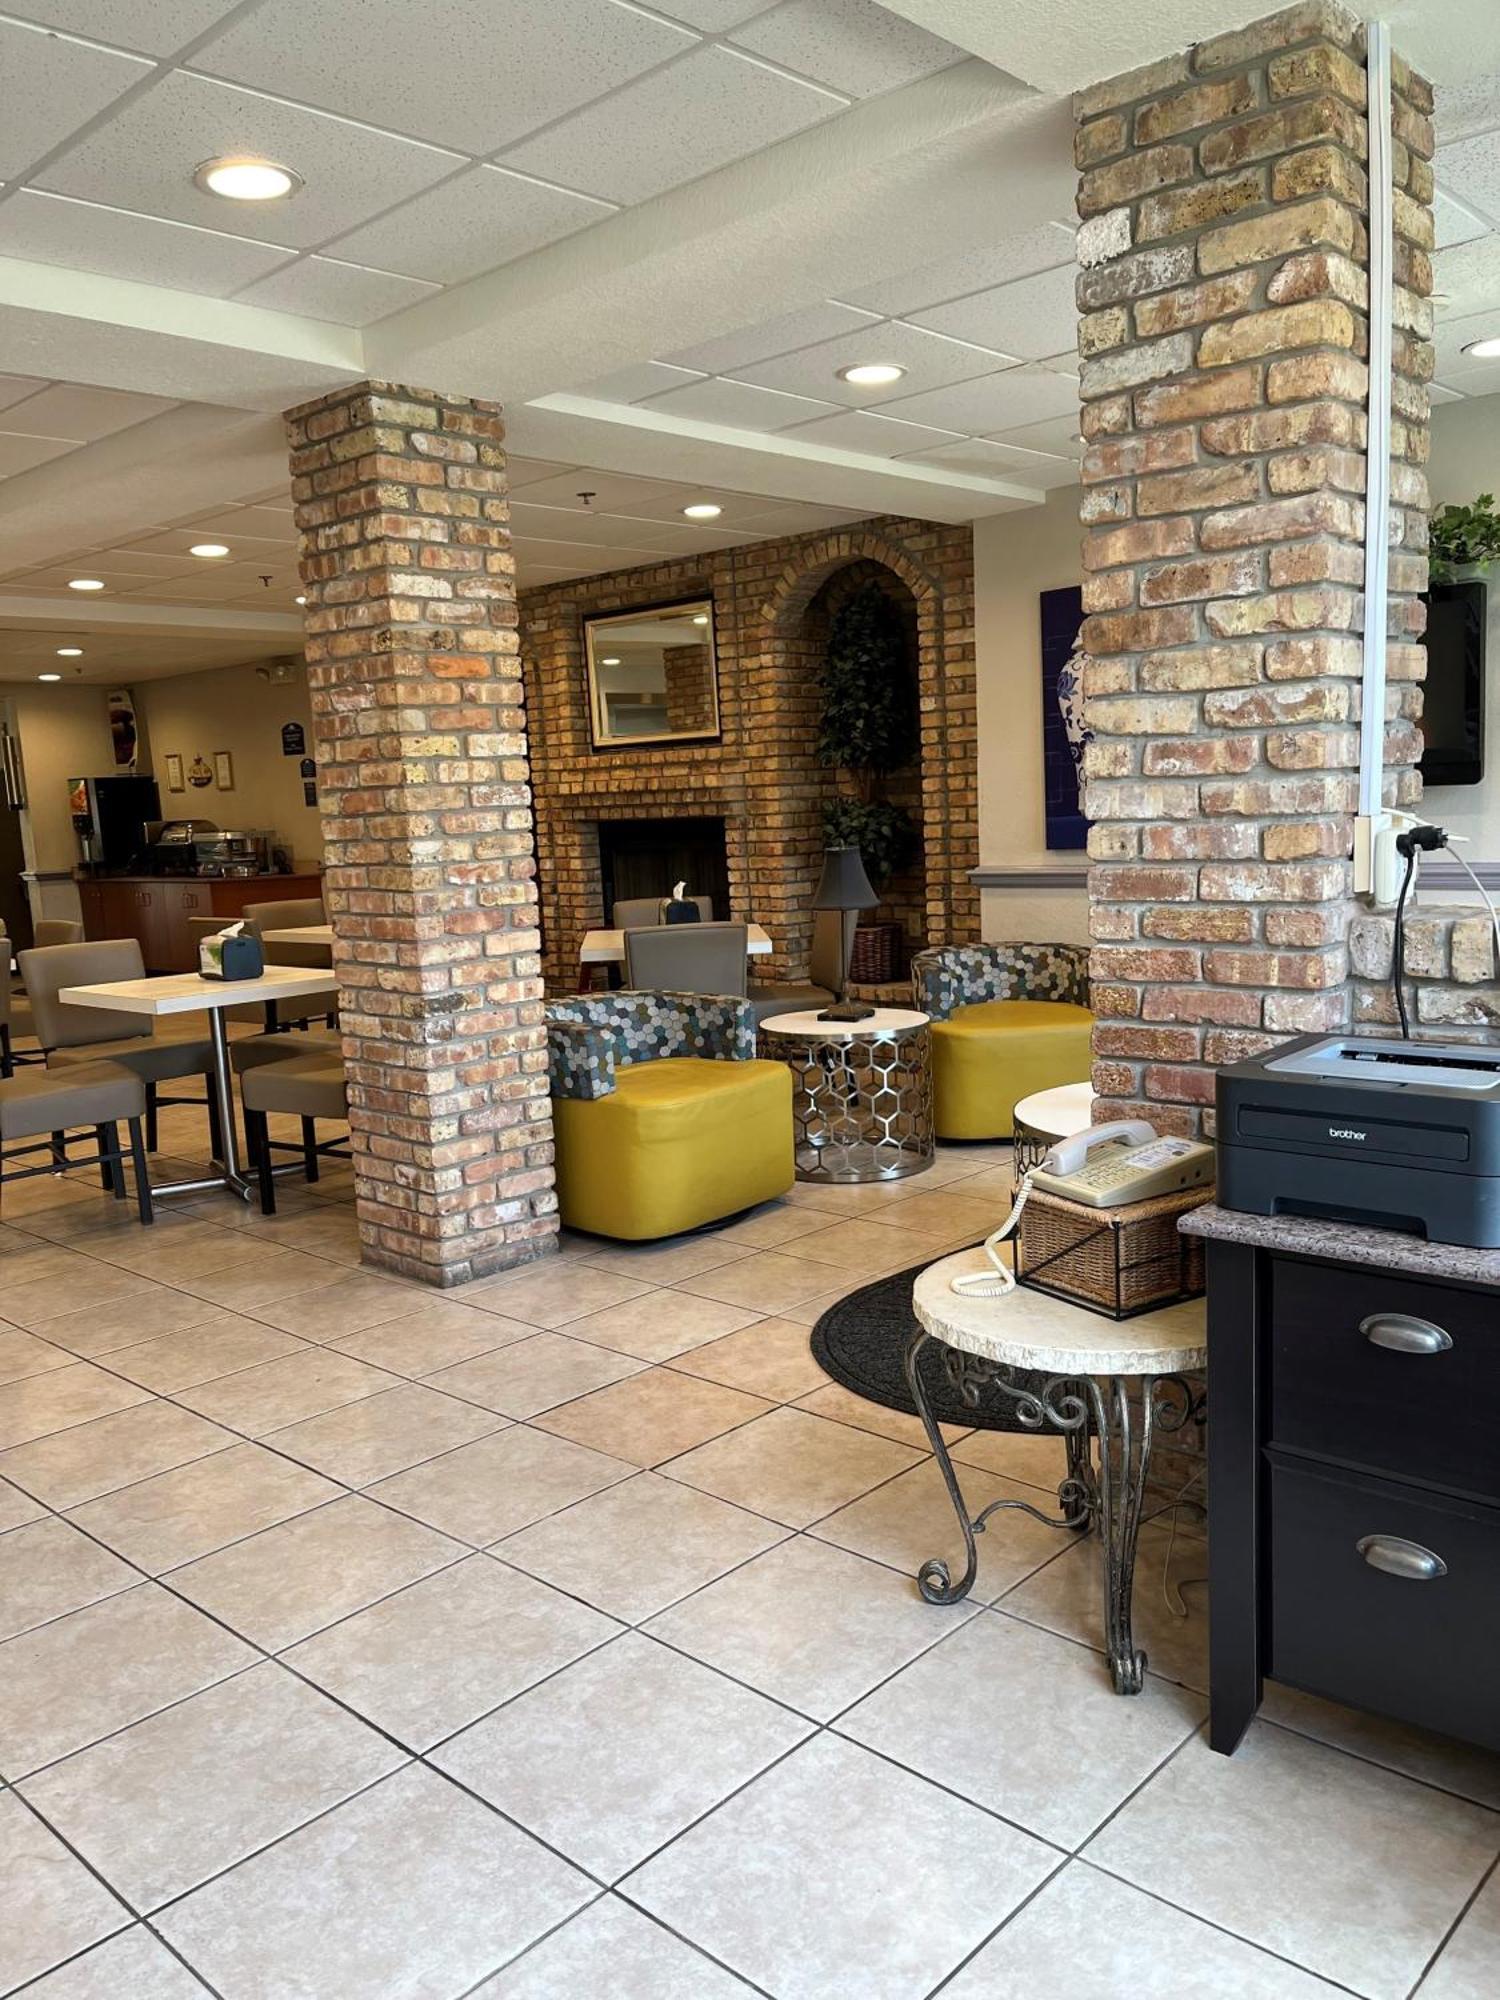 Microtel Inn And Suites By Wyndham - Lady Lake/ The Villages Bagian luar foto